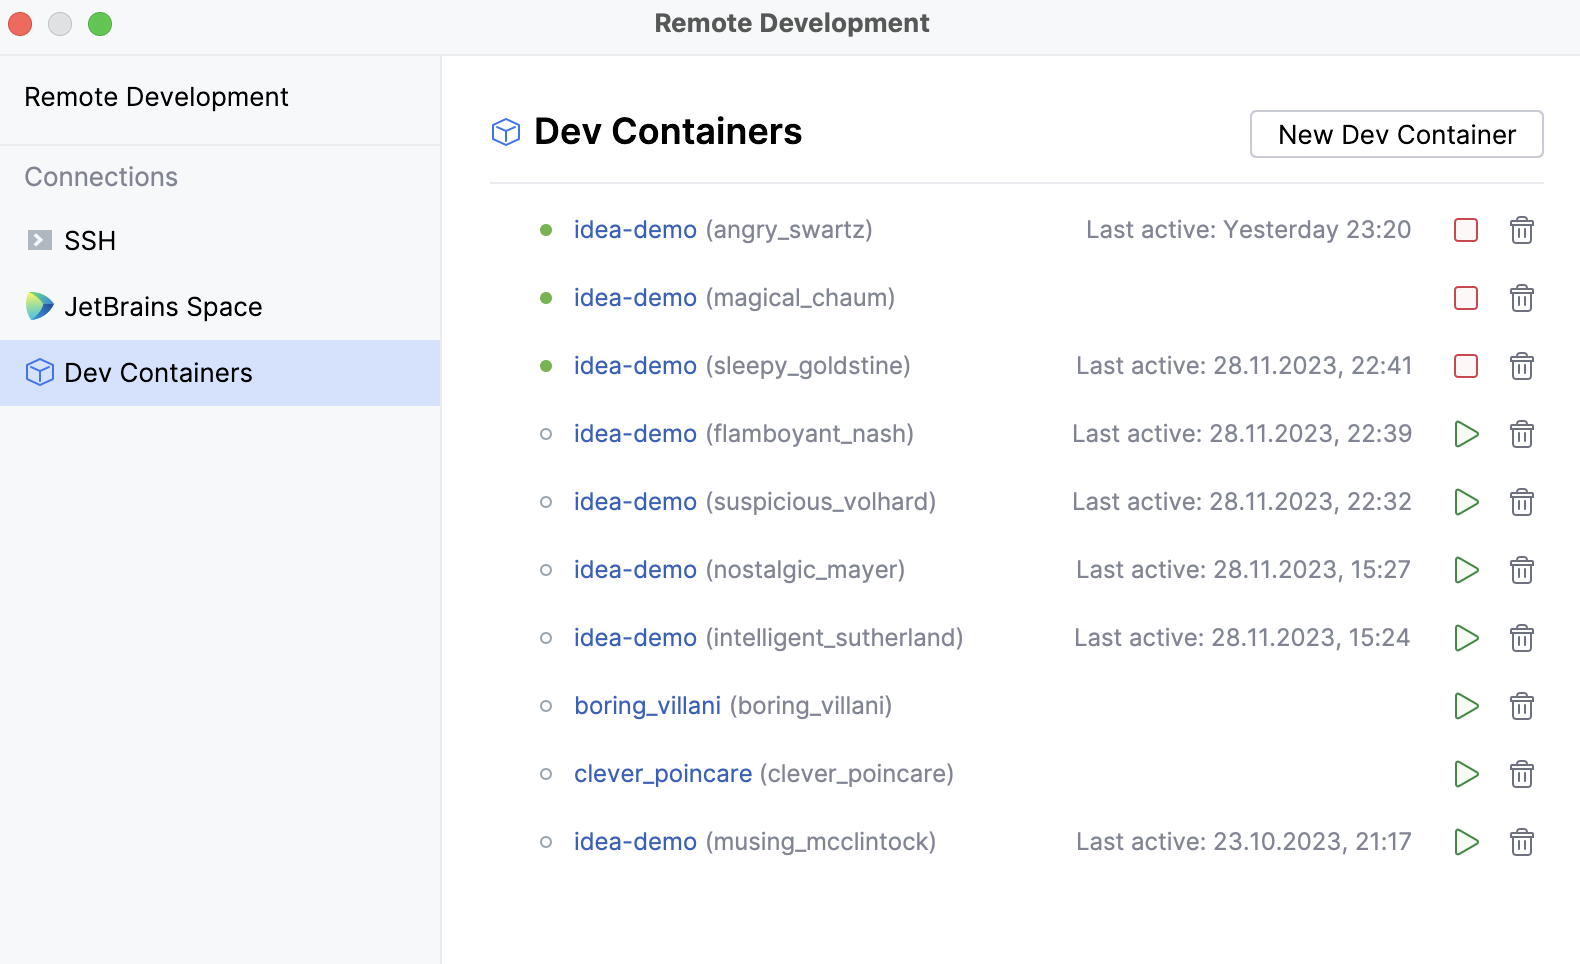 See dev containers